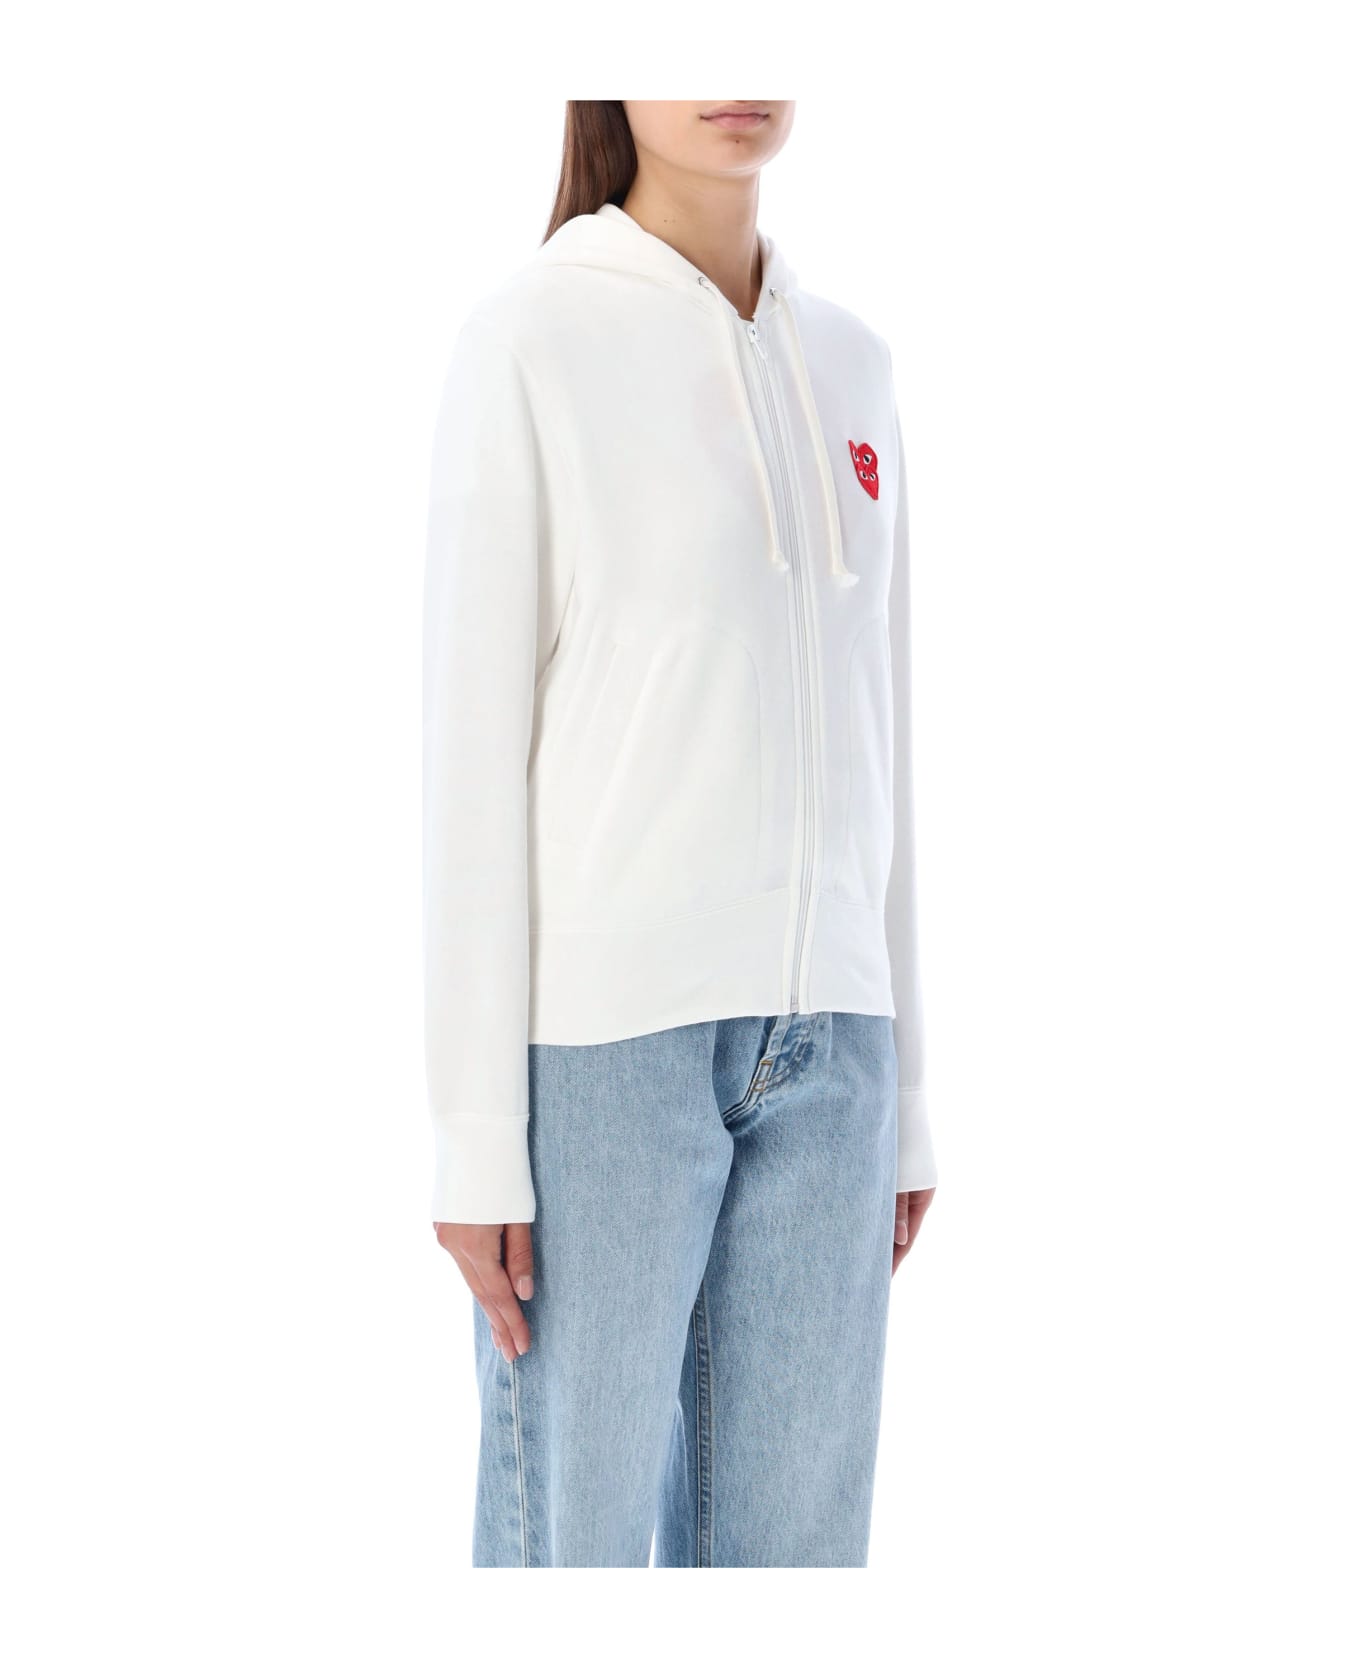 Comme des Garçons Play Double Heart Zipped Hoodie - WHITE